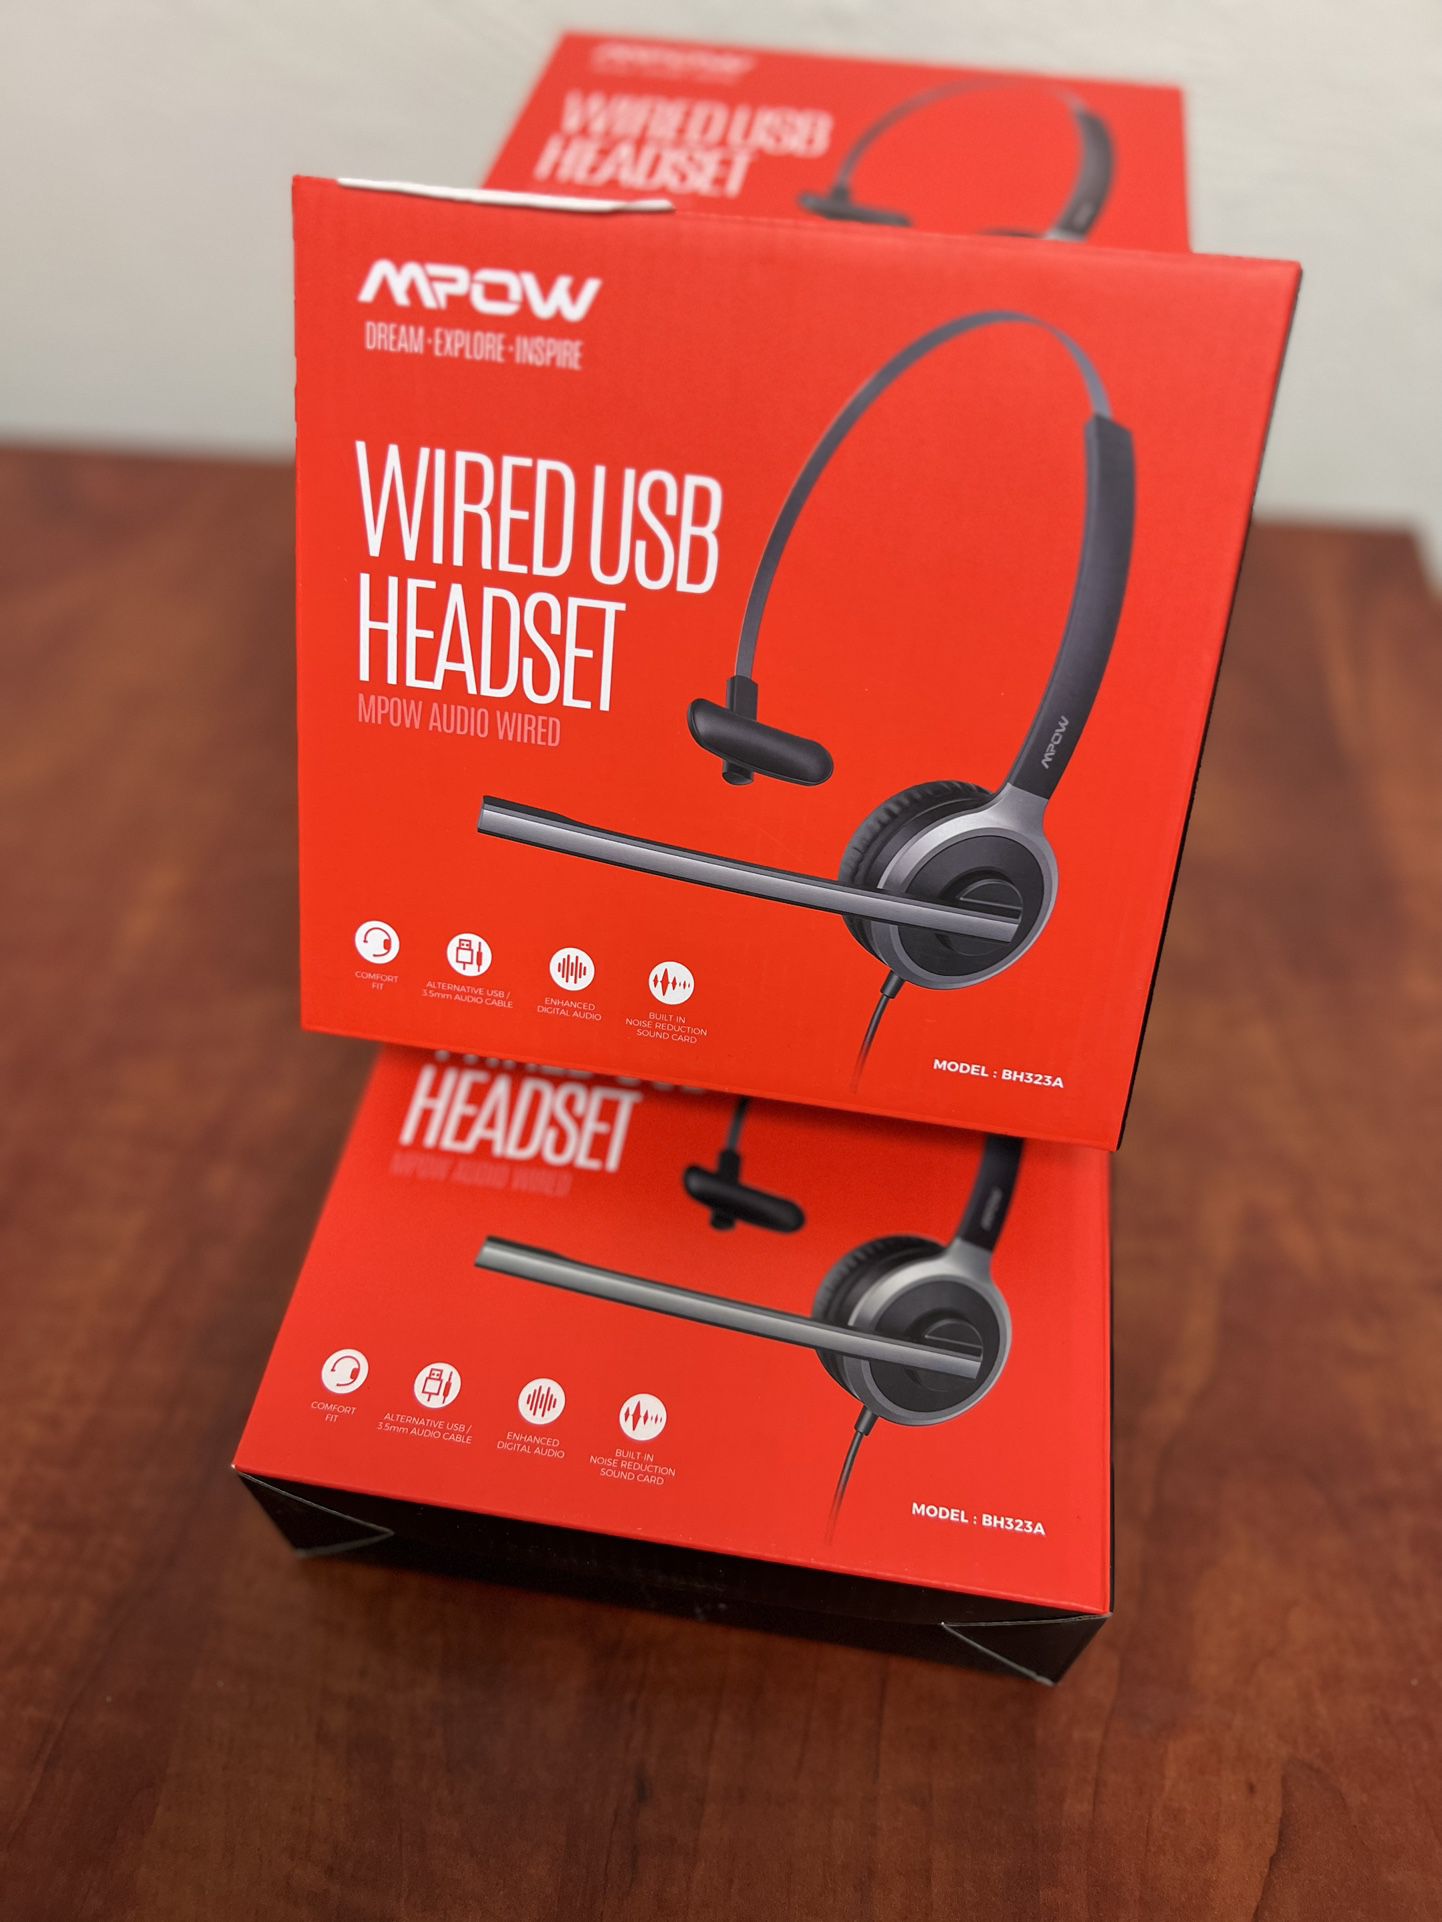 MPOW Audio Wired USB Headset Model BH323A